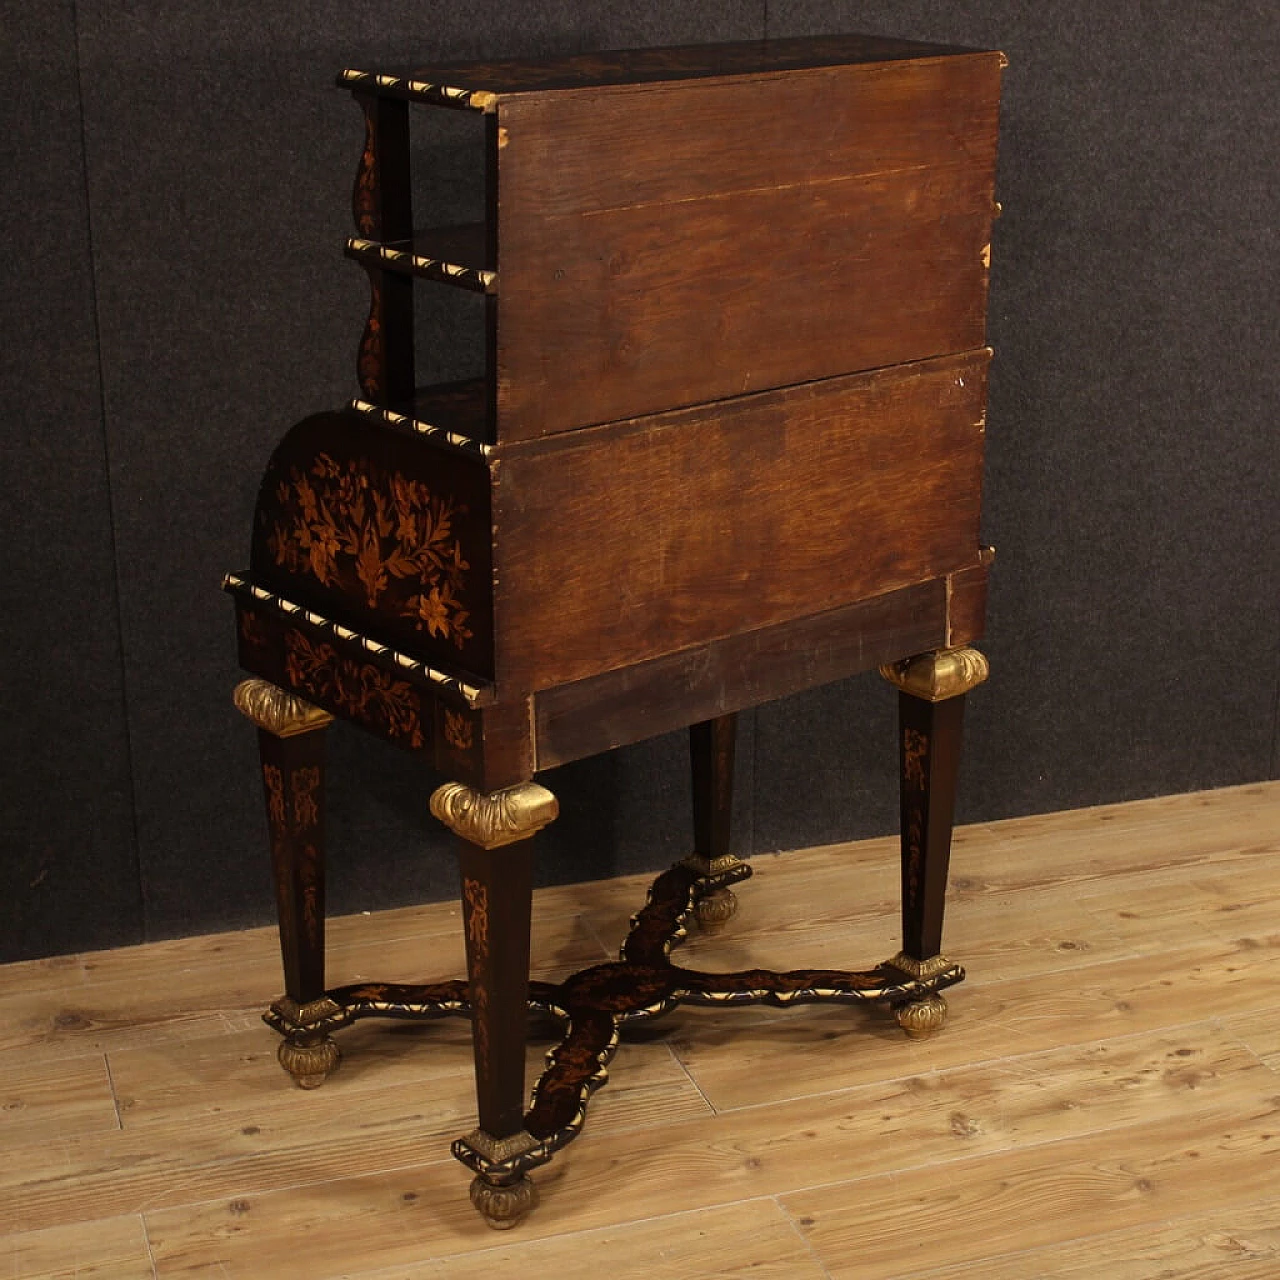 Inlaid French writing desk in Napoleon III style, early 20th century 1304415